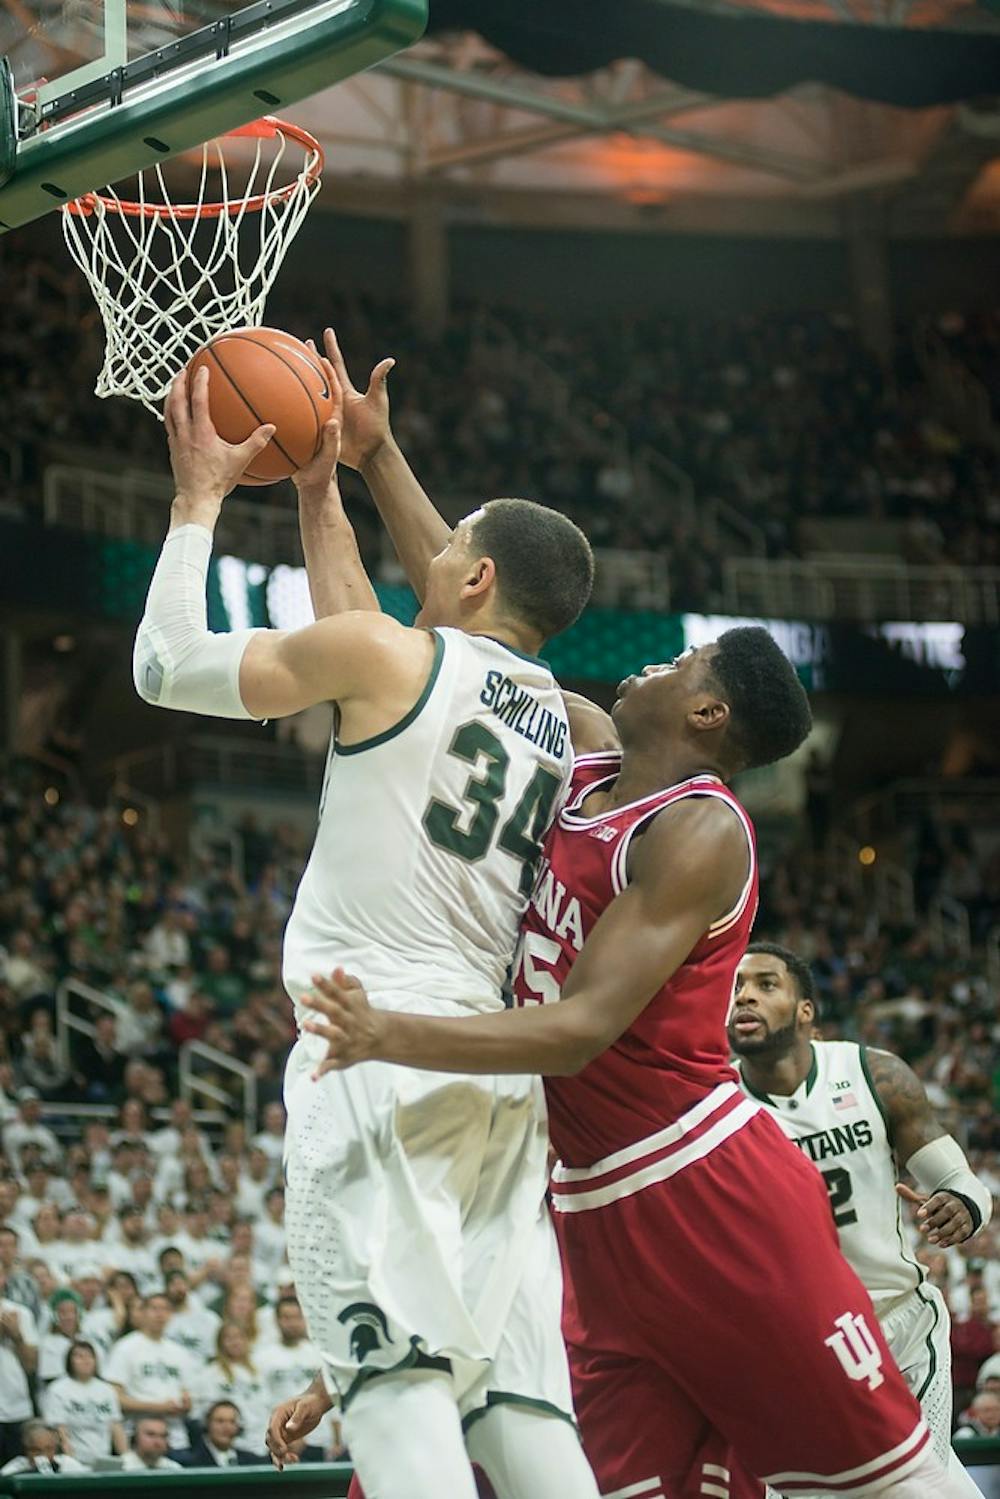 <p>Sophomore forward Gavin Schilling goes for a basket against Indiana forward Emmitt Holt Jan. 5, 2014, during the game against Indiana at Breslin Center. The Spartans defeated the Hoosiers, 70-50. Erin Hampton/The State News</p>